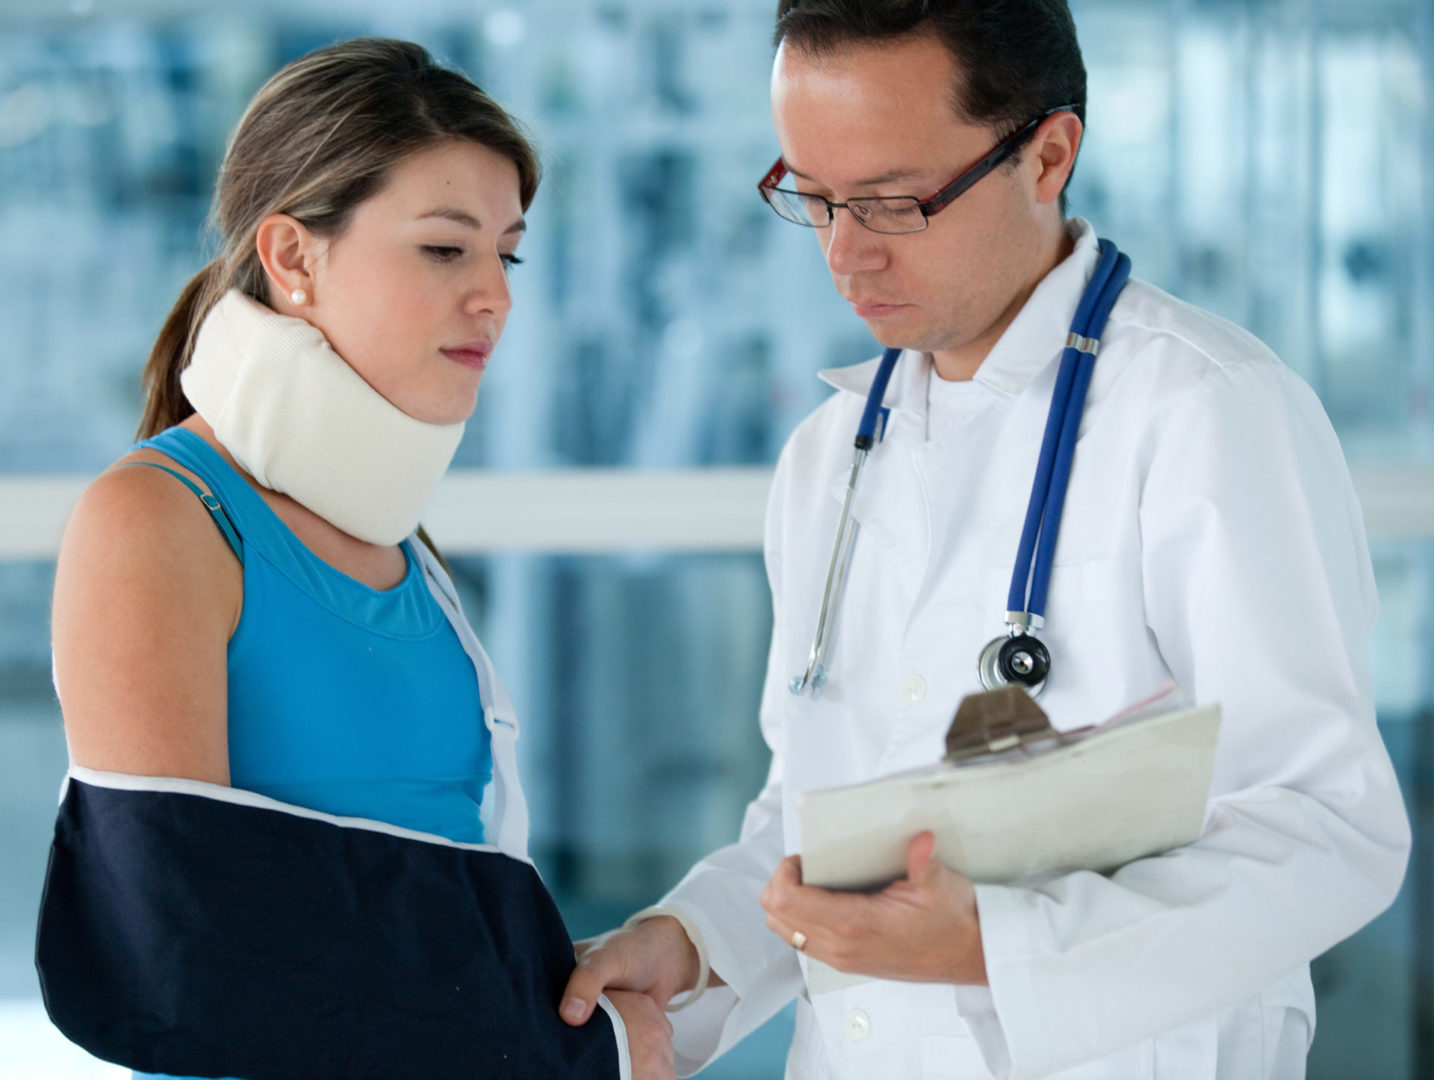 Negligence Action Barred Against Employer by Exclusive Remedy Provisions When Injured At Work